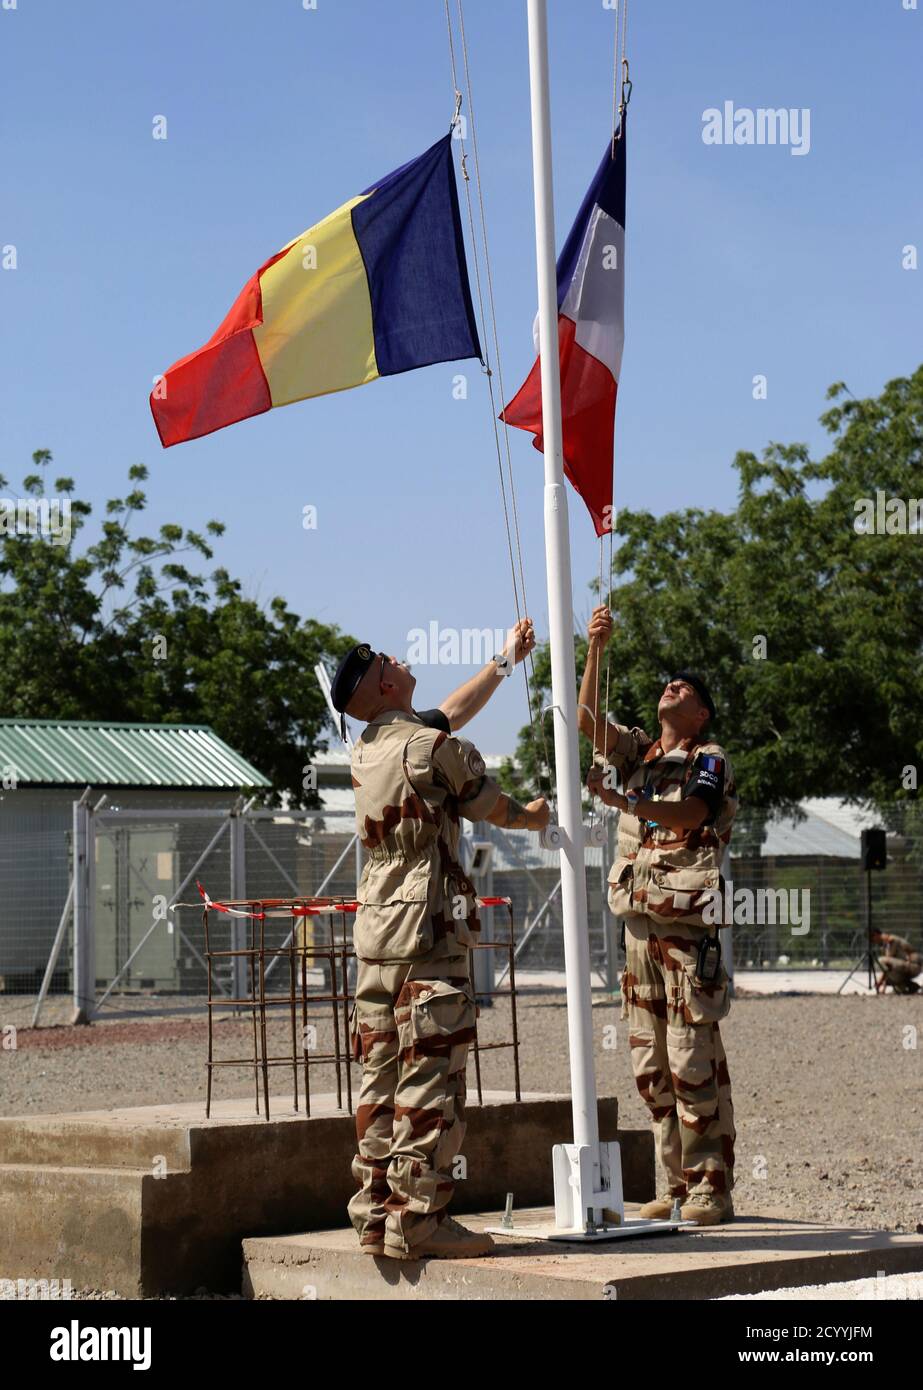 French soldiers raise the French and Chadian flags at their military base in Chadian capital N?Djamena, October 26, 2014. Chad's army is considered one of Africa's most battle-ready and played a frontline role alongside the French in an operation in 2013 against Islamic fighters in Mali's desert north. In recent months, Chad has changed its attitude to Boko Haram. Chadian forces are stepping up surveillance and have made several arrests, residents and security sources say. It has also pledged 700 troops for a cross-border force in the Lake Chad region to counter the group, due to start operati Stock Photo